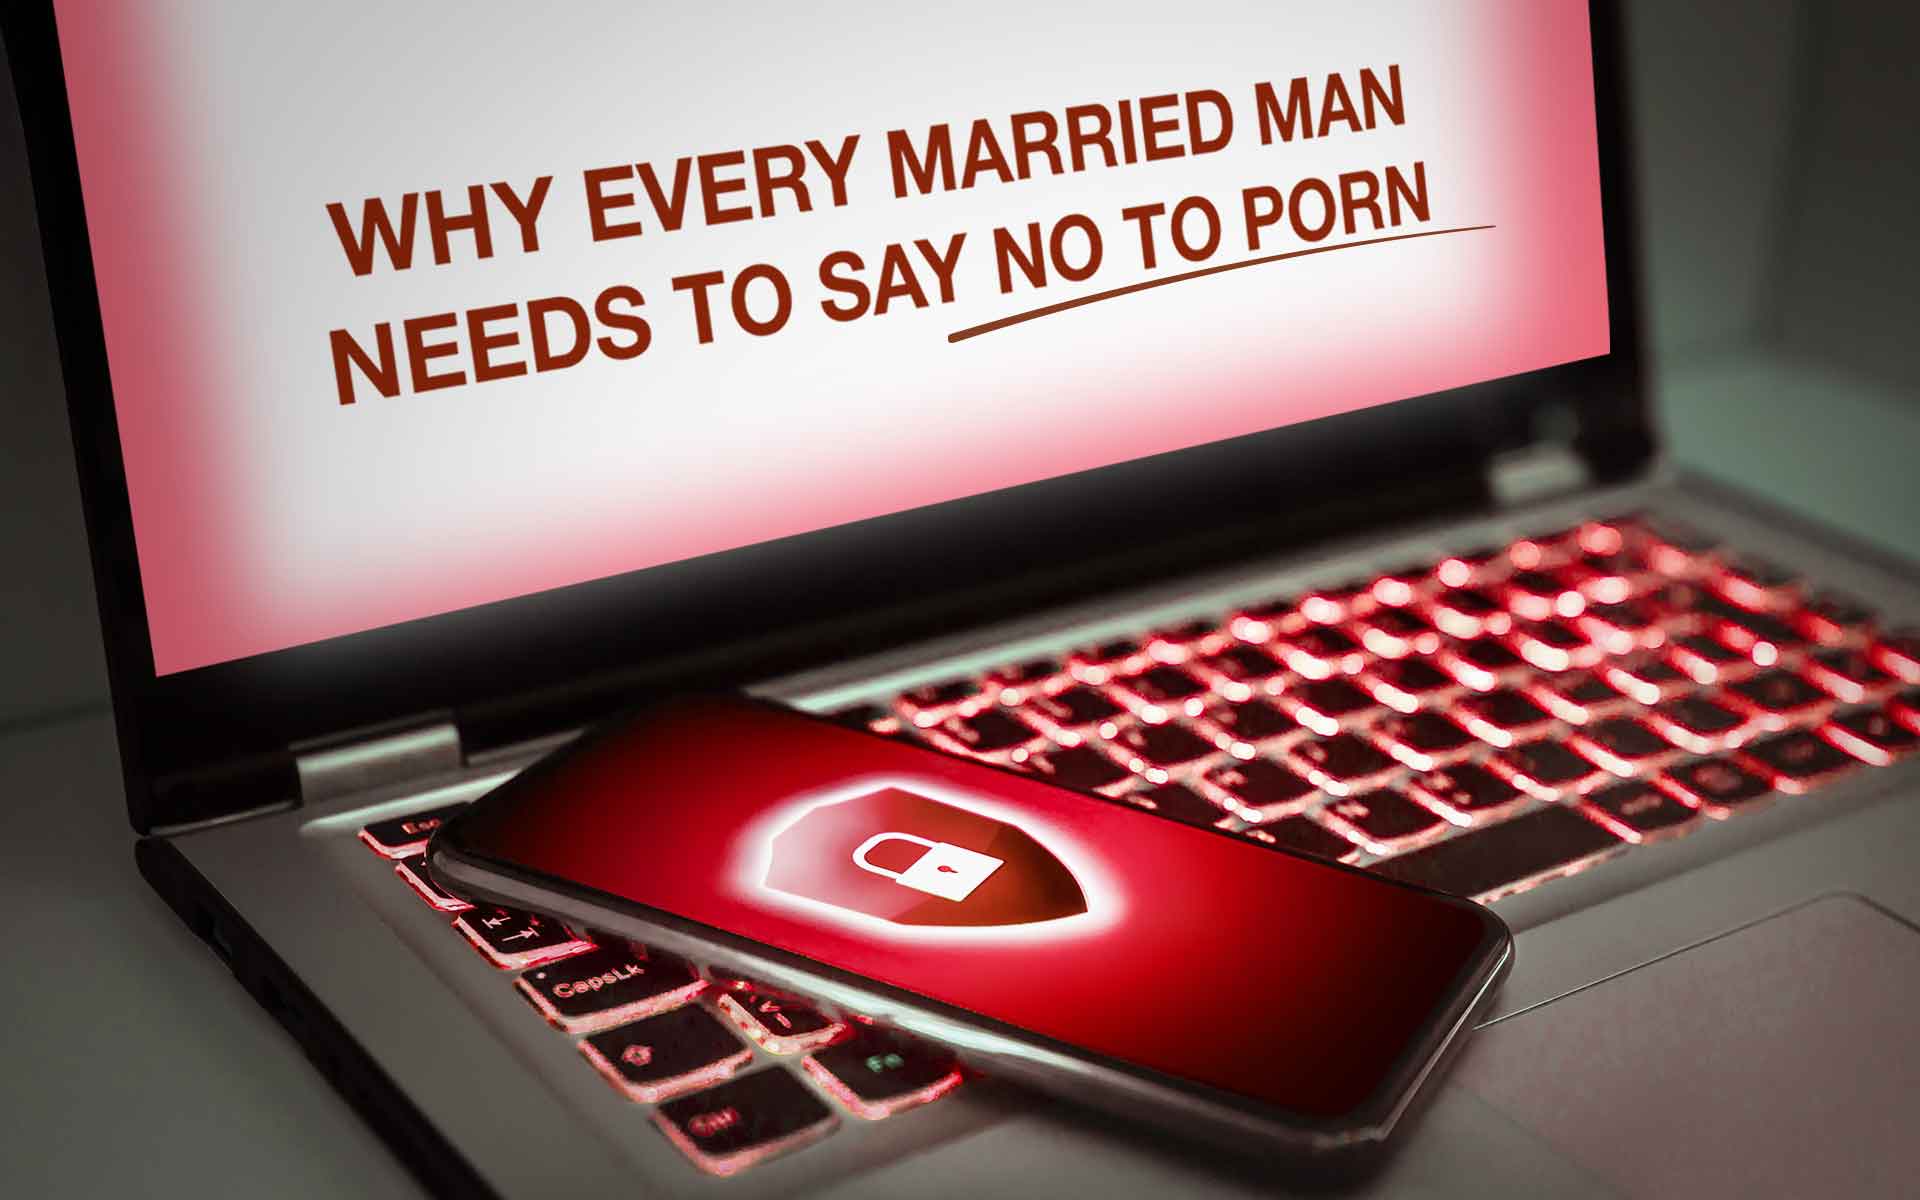 Why Every Married Man Needs to Say No to Porn